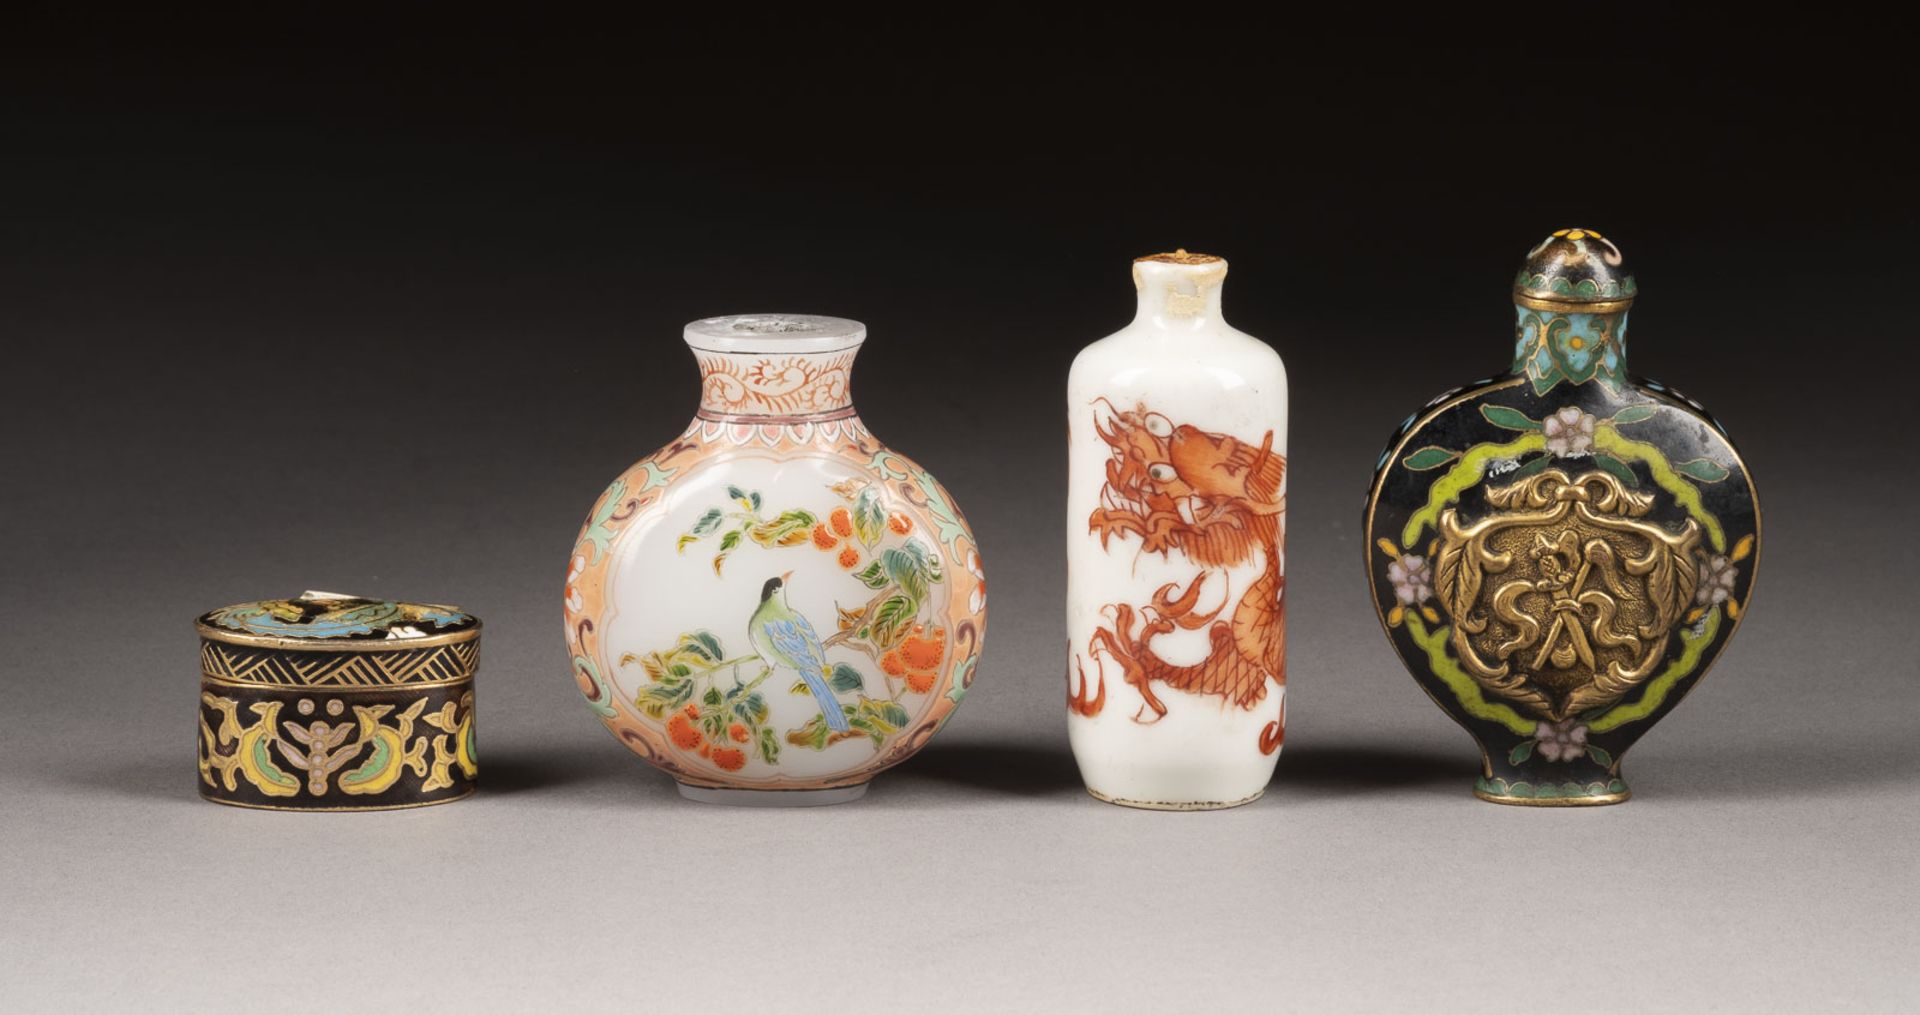  THREE SNUFF BOTTLES AND A SMALL CLOISONNÉ ENAMEL BOX